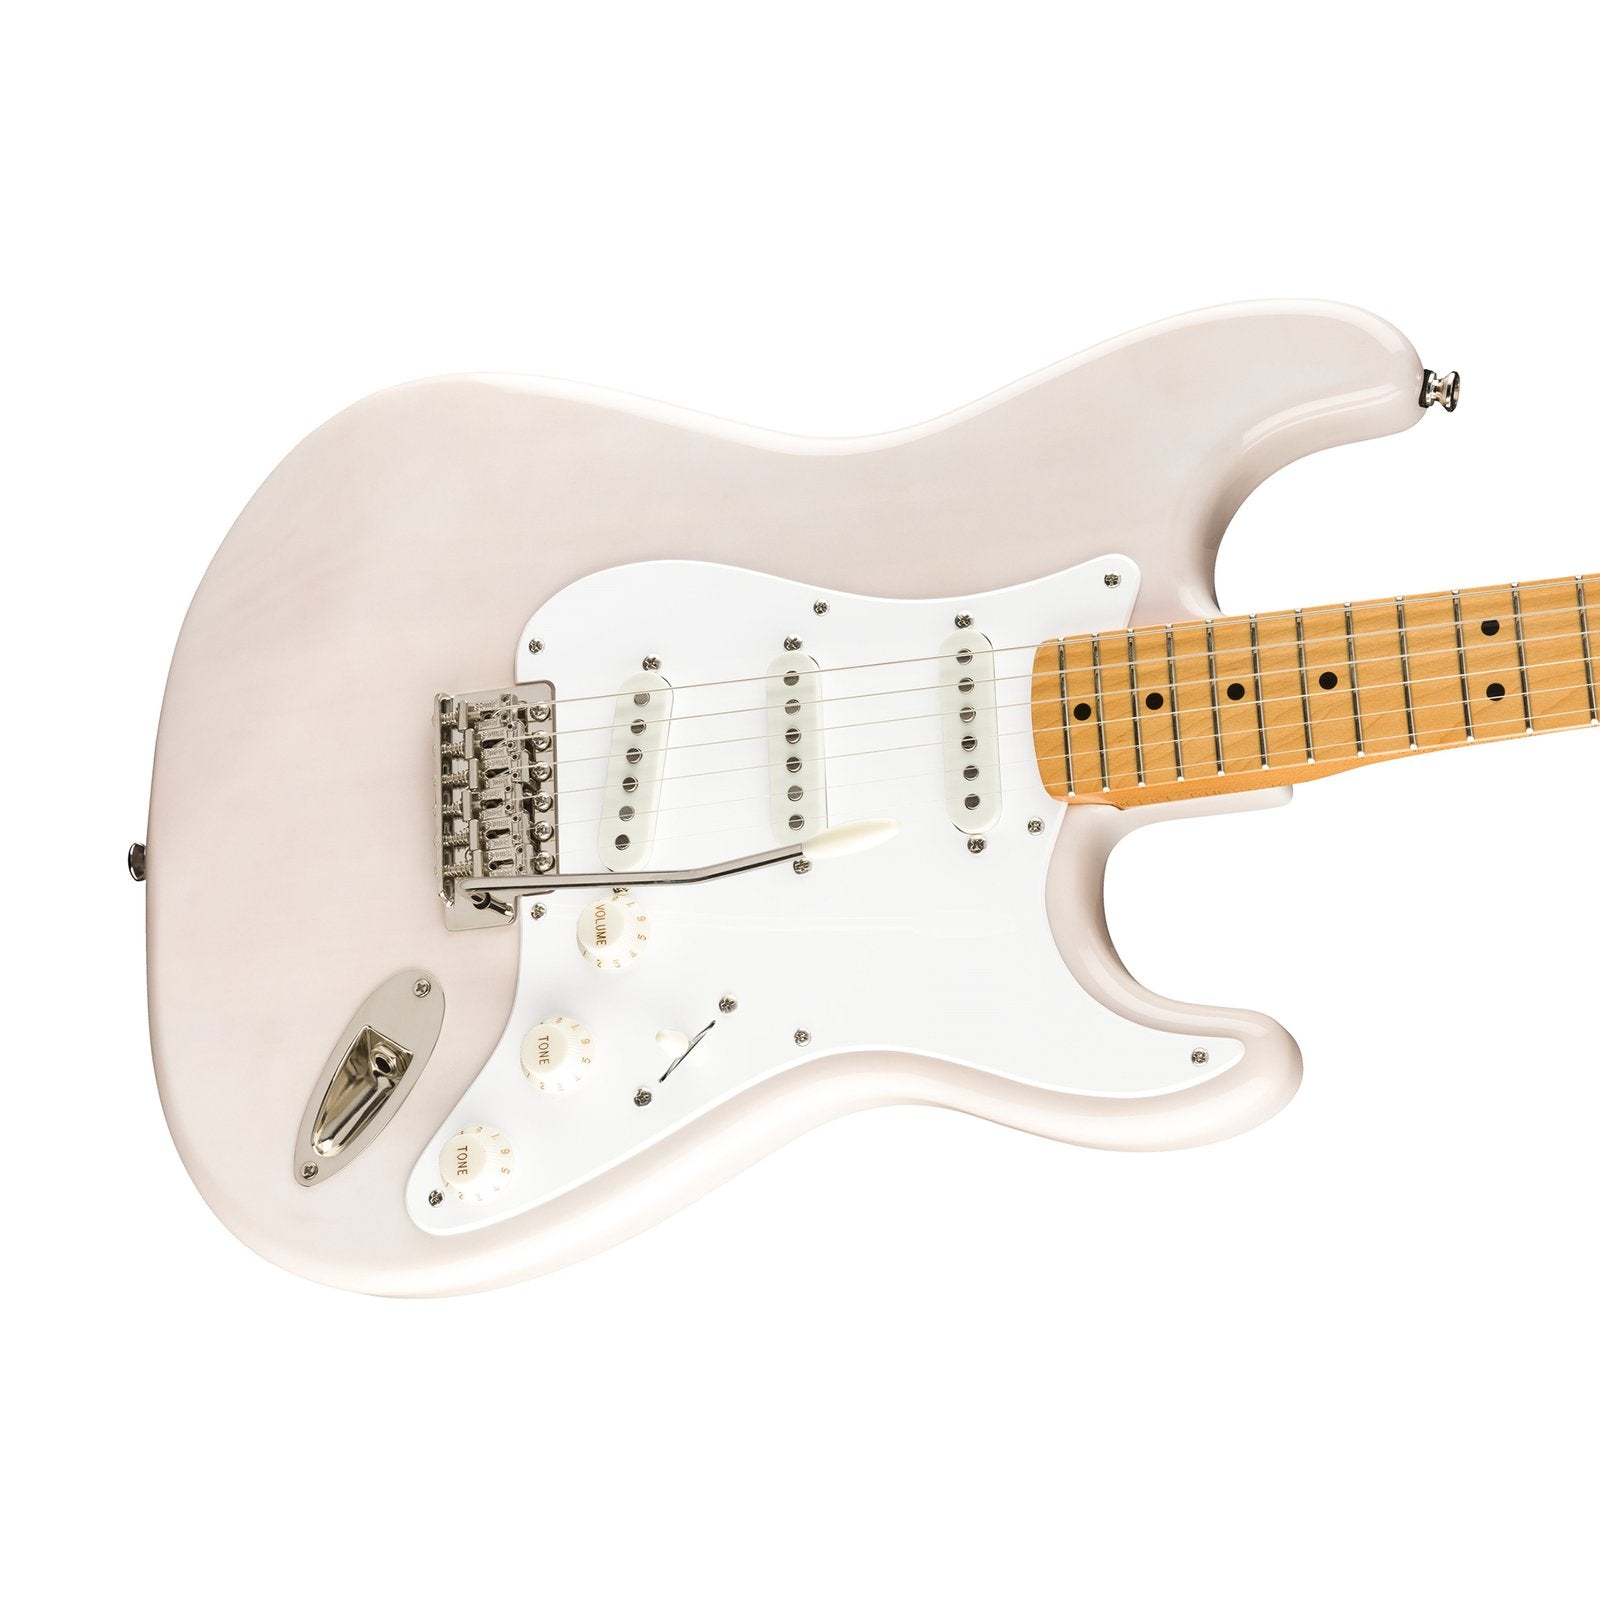 Squier Classic Vibe 50s Stratocaster Electric Guitar, Maple FB, White Blonde, SQUIER BY FENDER, ELECTRIC GUITAR, squier-by-fender-electric-guitar-037-4005-501, ZOSO MUSIC SDN BHD